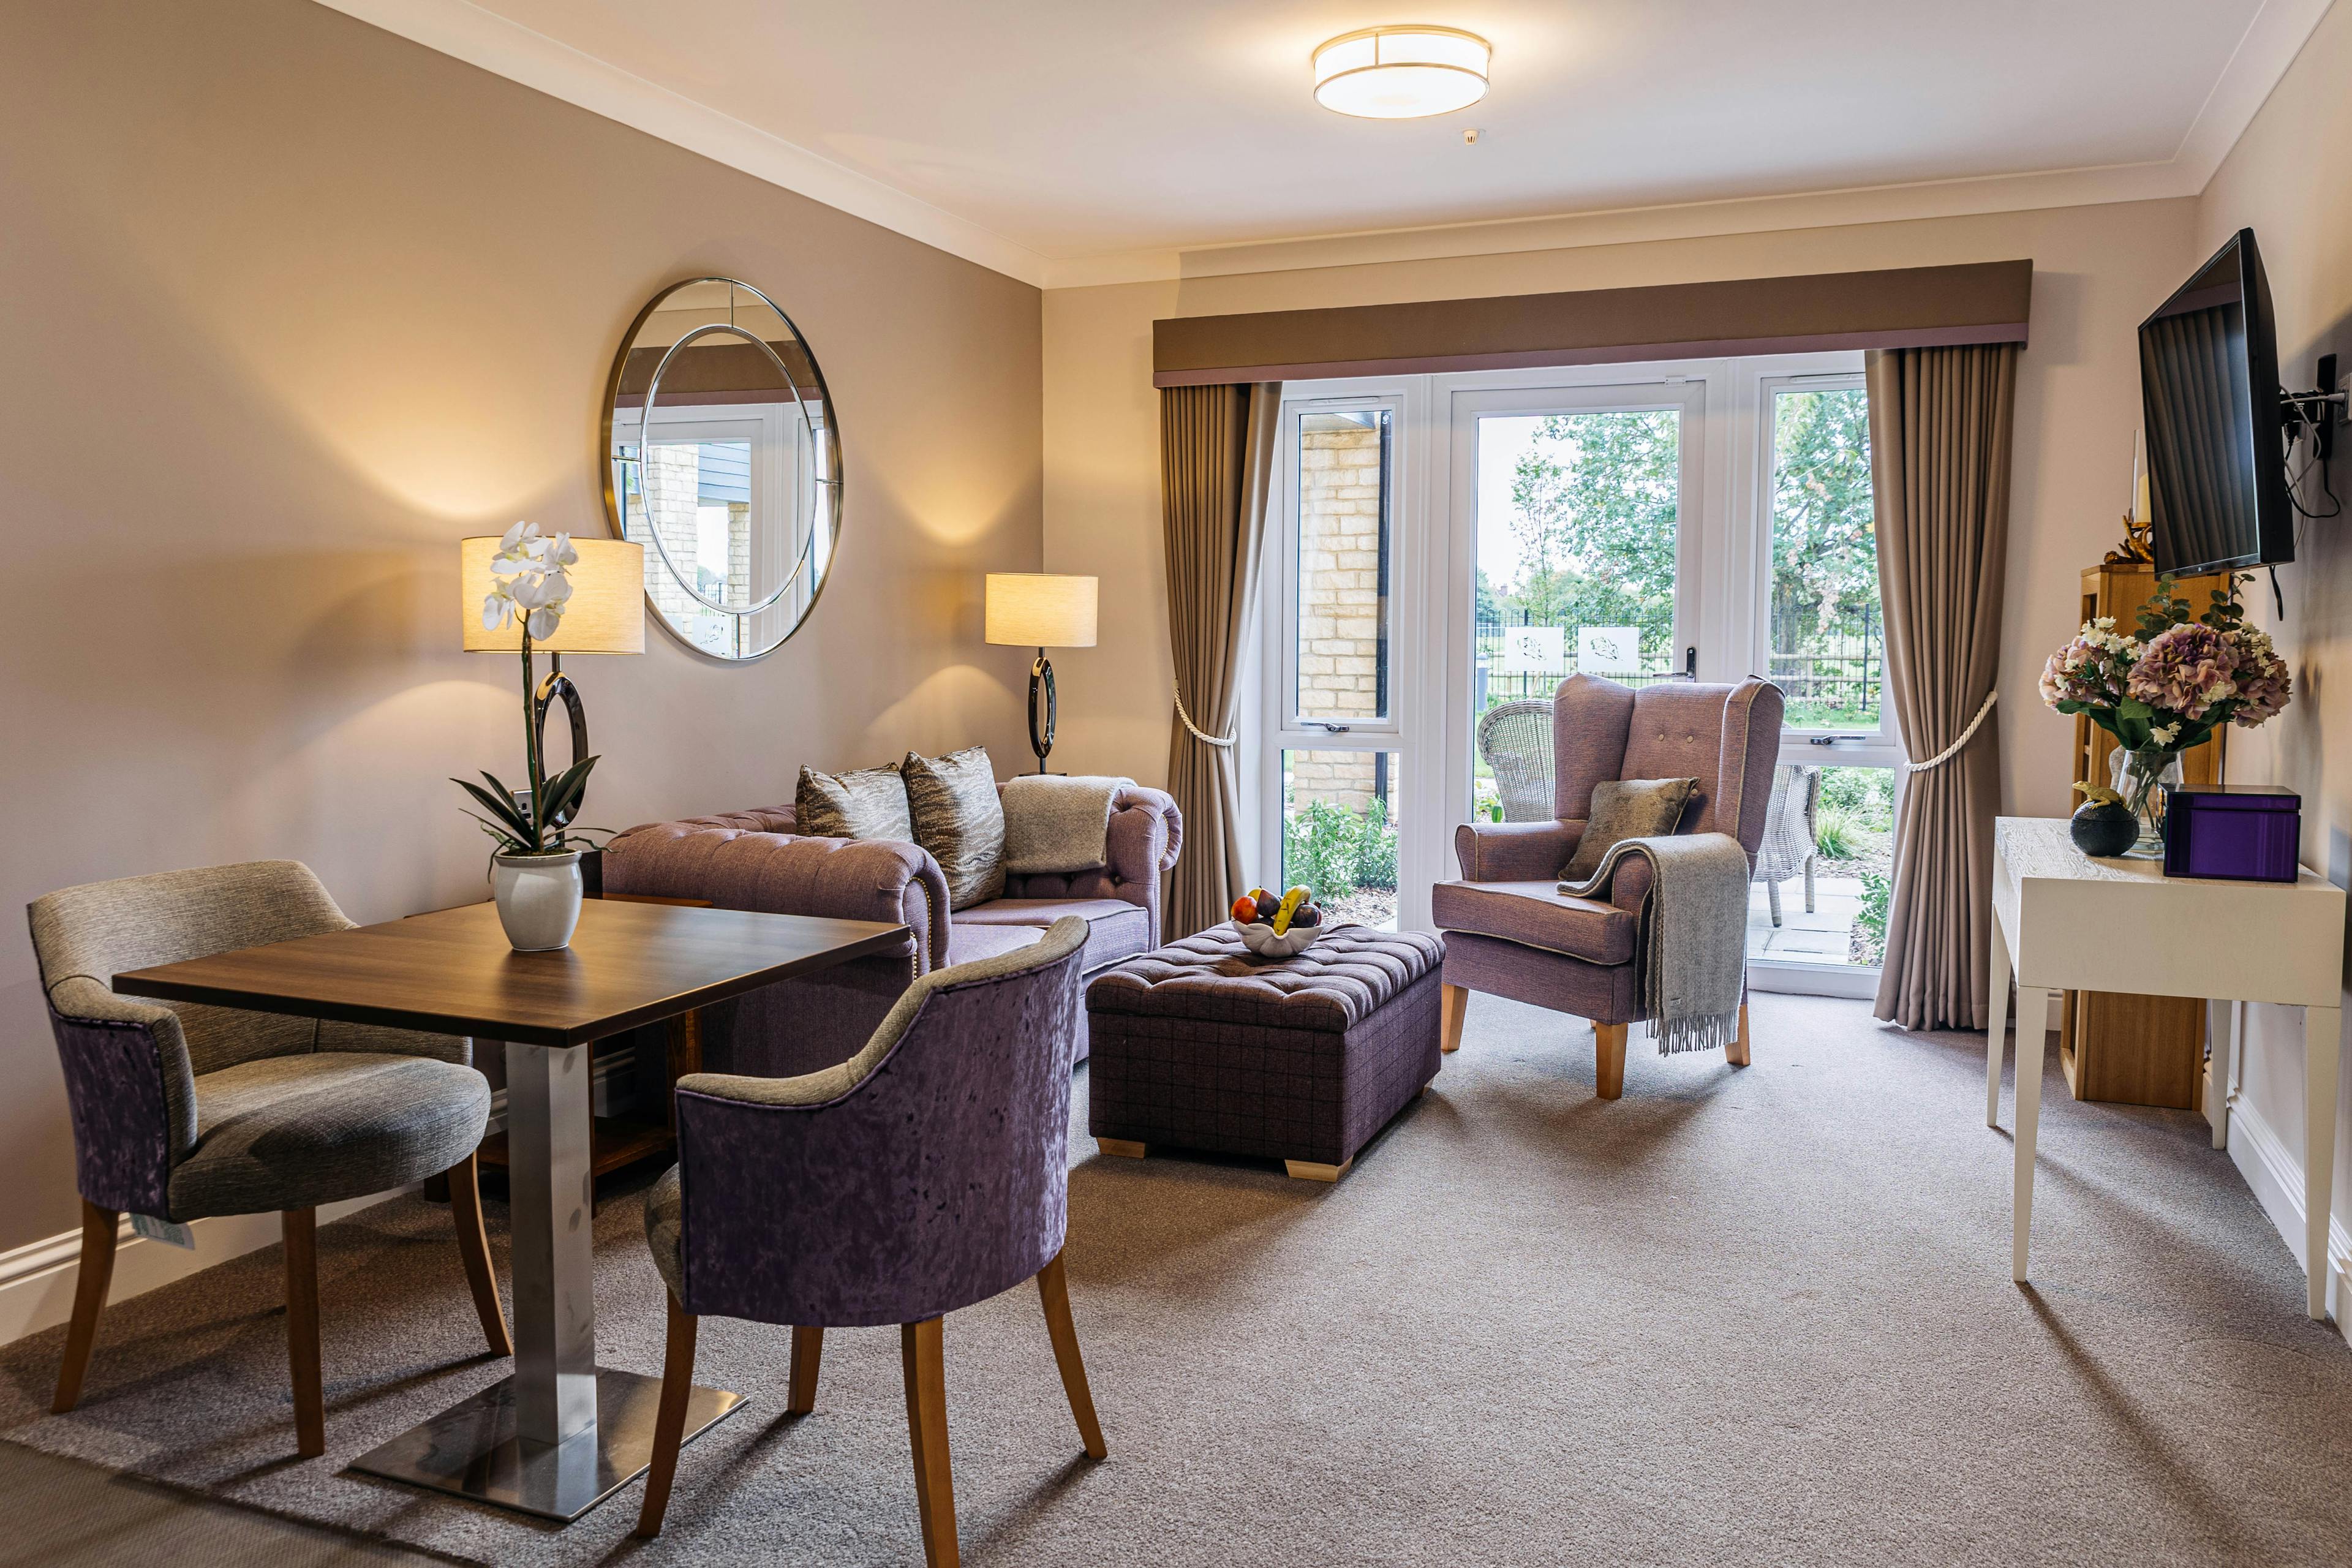 Quite Area at Parley Place Care Home in Ferndown, Dorset